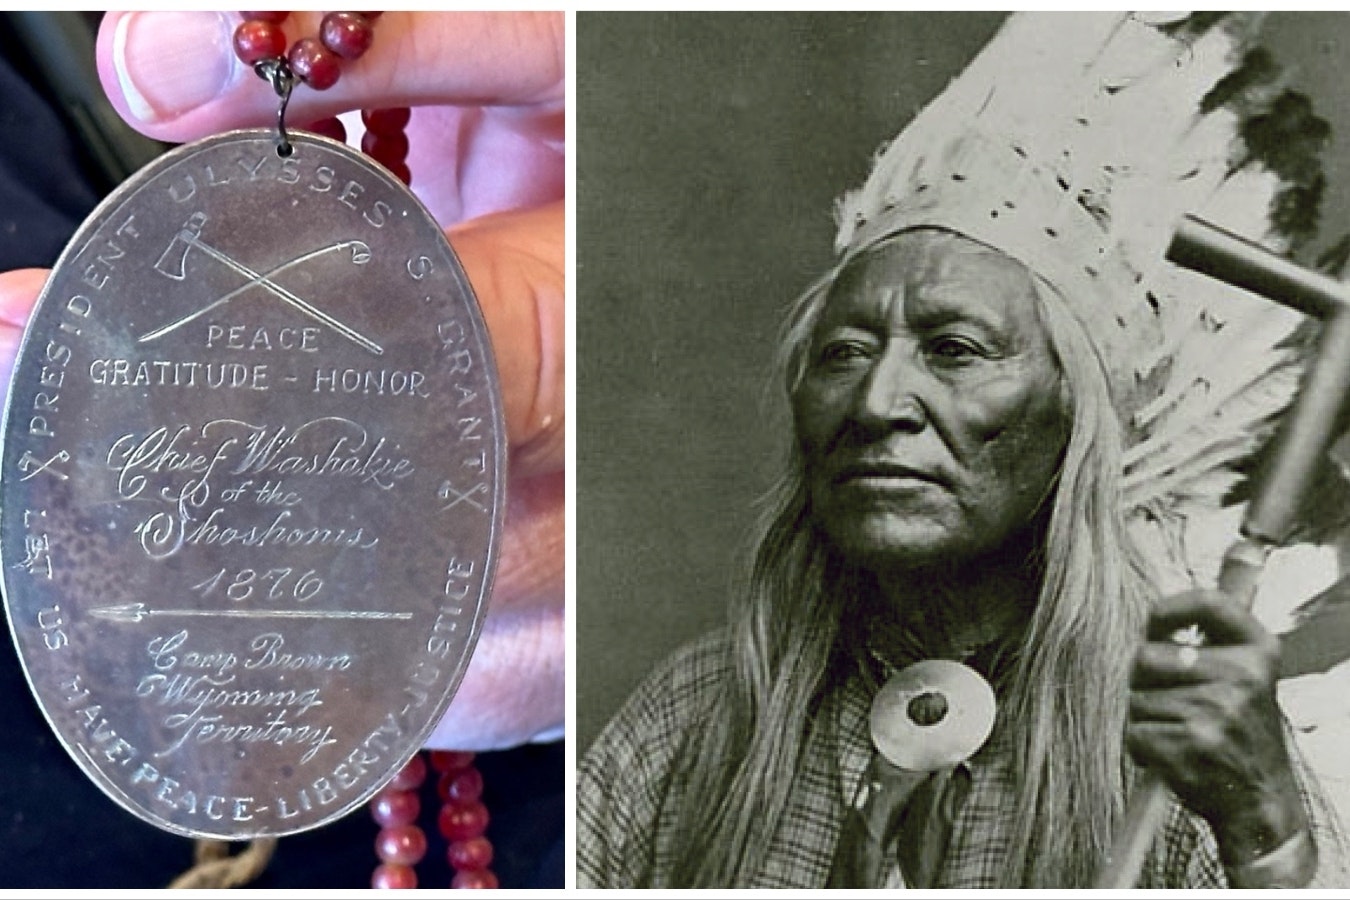 Kim Redding, a Lander, Wyoming, native was shocked to find this historically important piece of history for sale on eBay, left, an 1876 peace medal given to Chief Washakie by President Ulysses S. Grant.